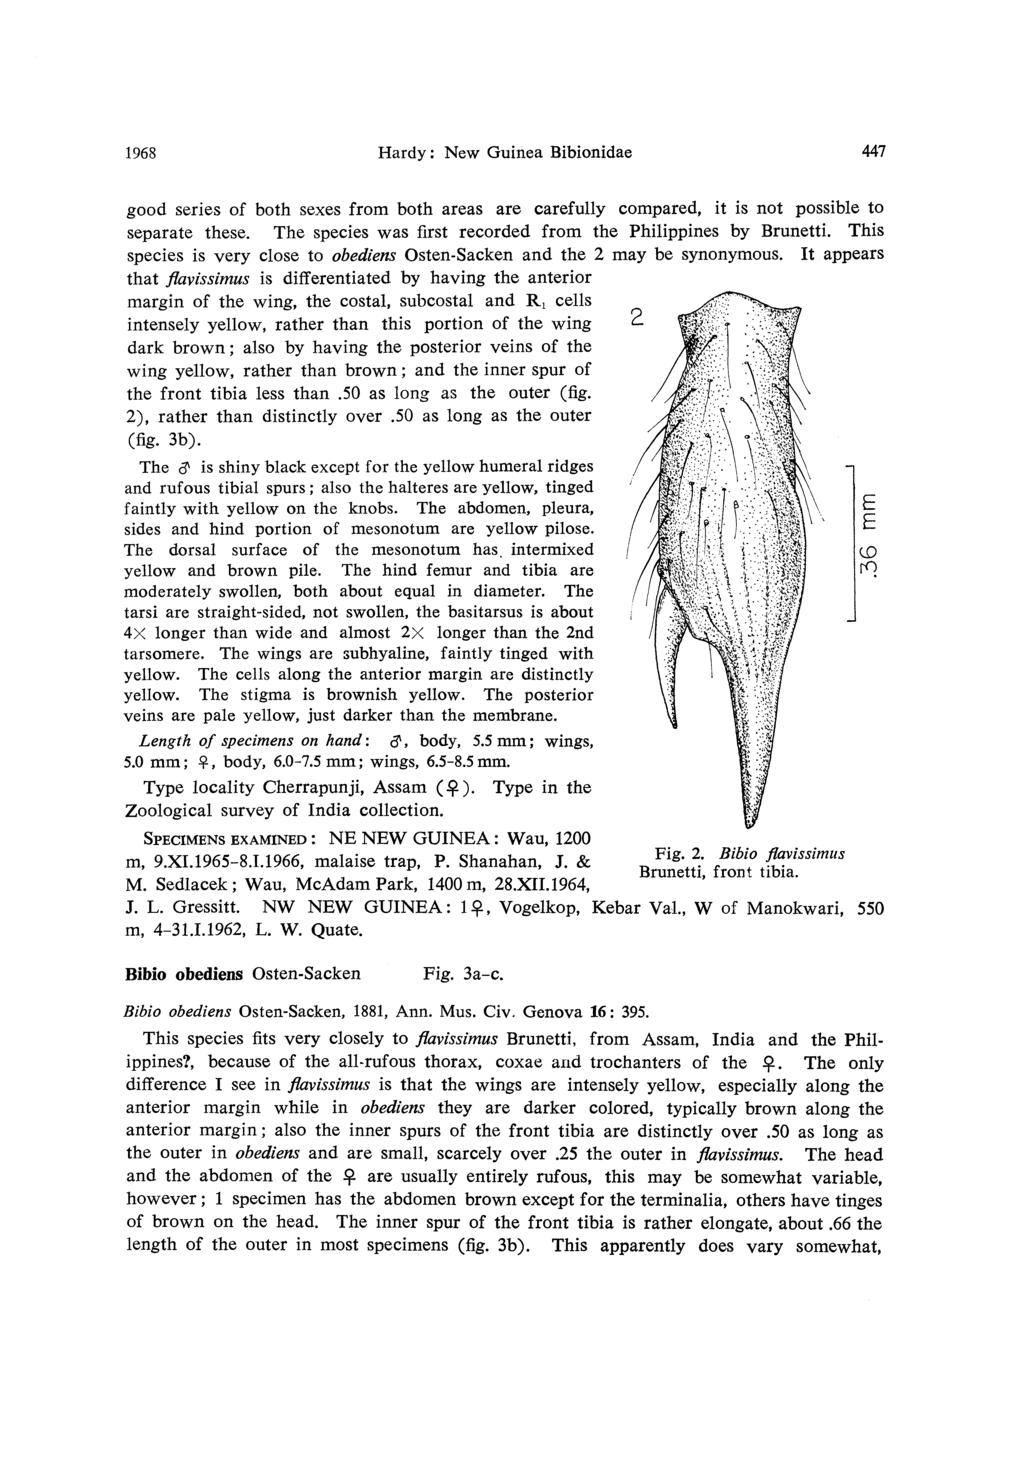 1968 Hardy: New Guinea Bibionidae 447 good series of both sexes from both areas are carefully compared, it is not possible to separate these.